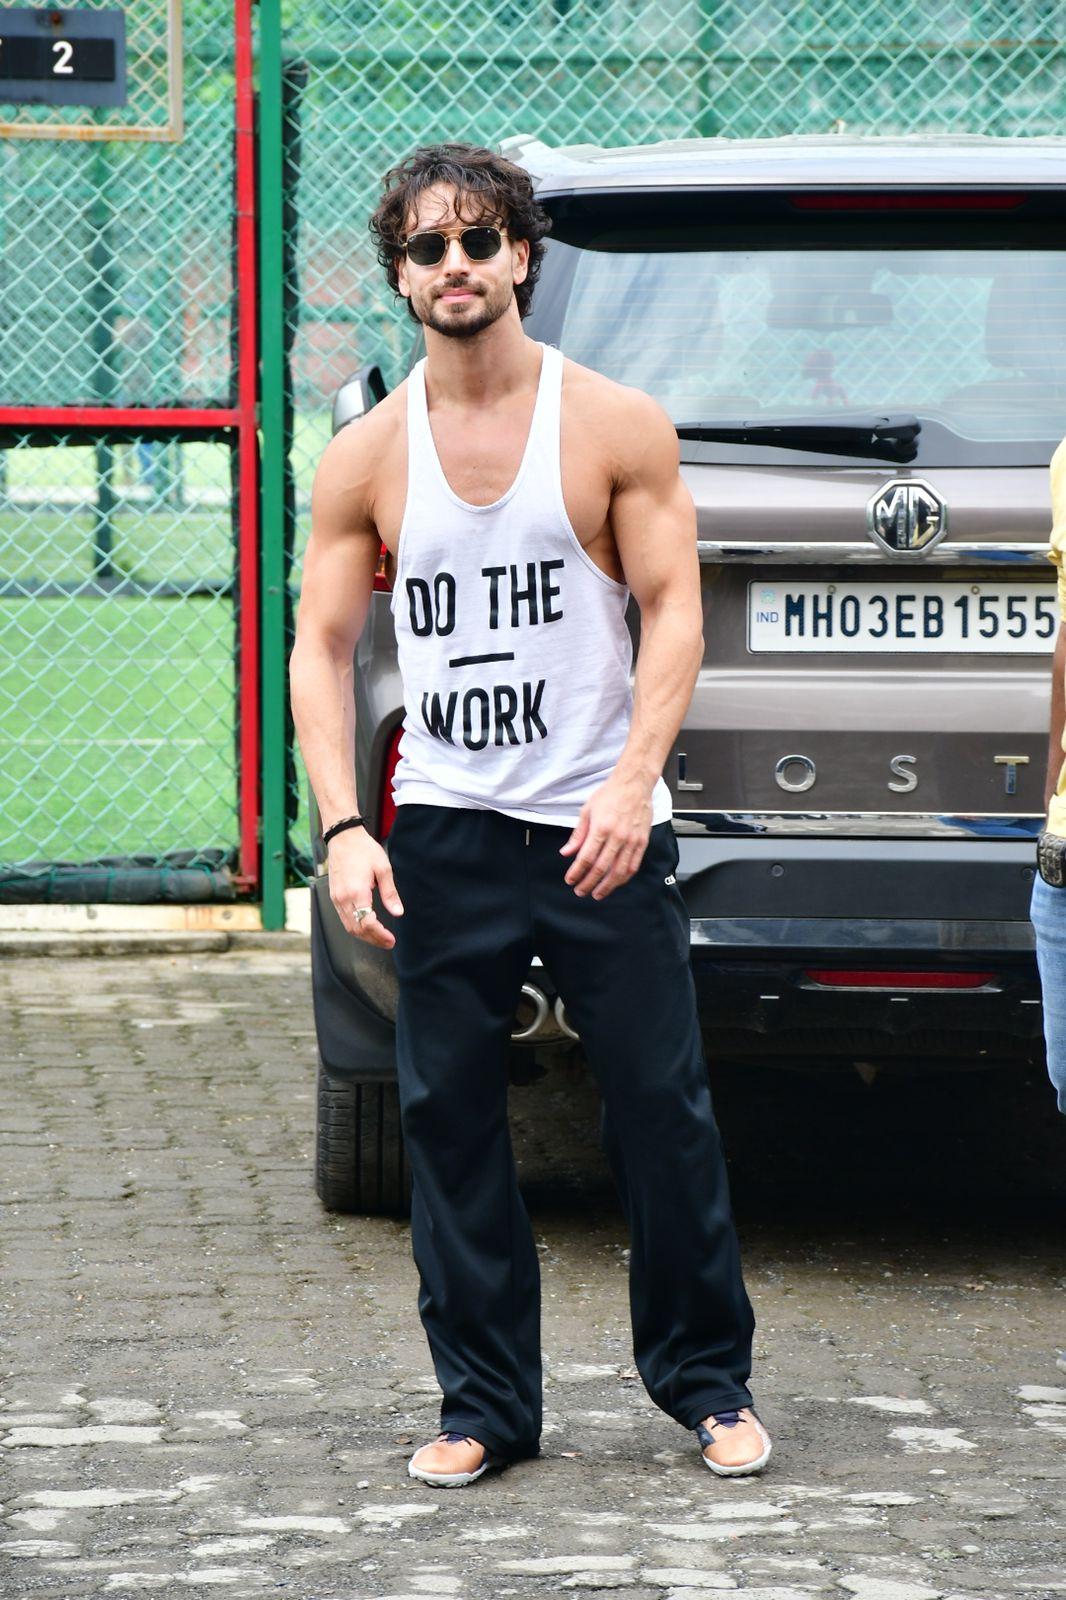 Bollywood's dynamic action star, Tiger Shroff, showcased his passion for sports as he was spotted playing football at St. Andrews Turf in Bandra.